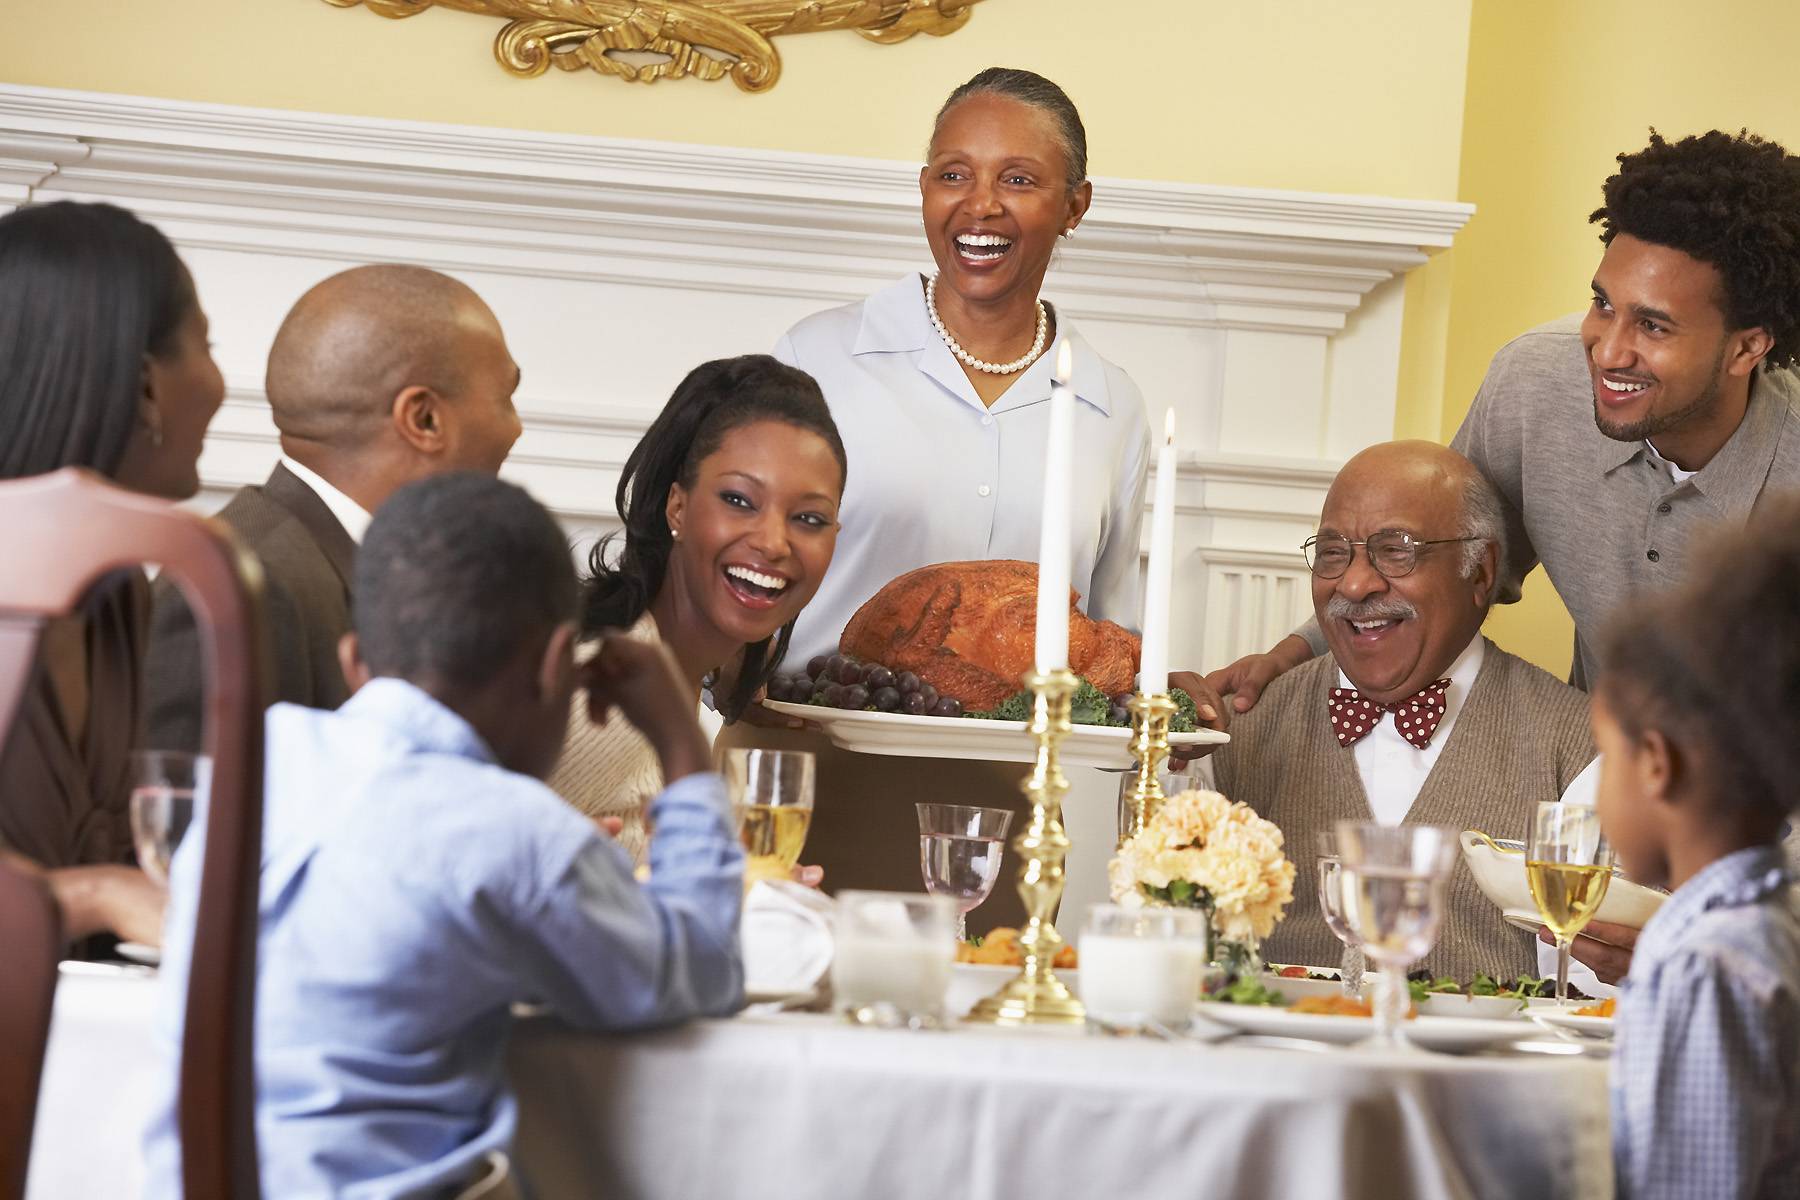 How to Deal With Family Dysfunction During the Holidays